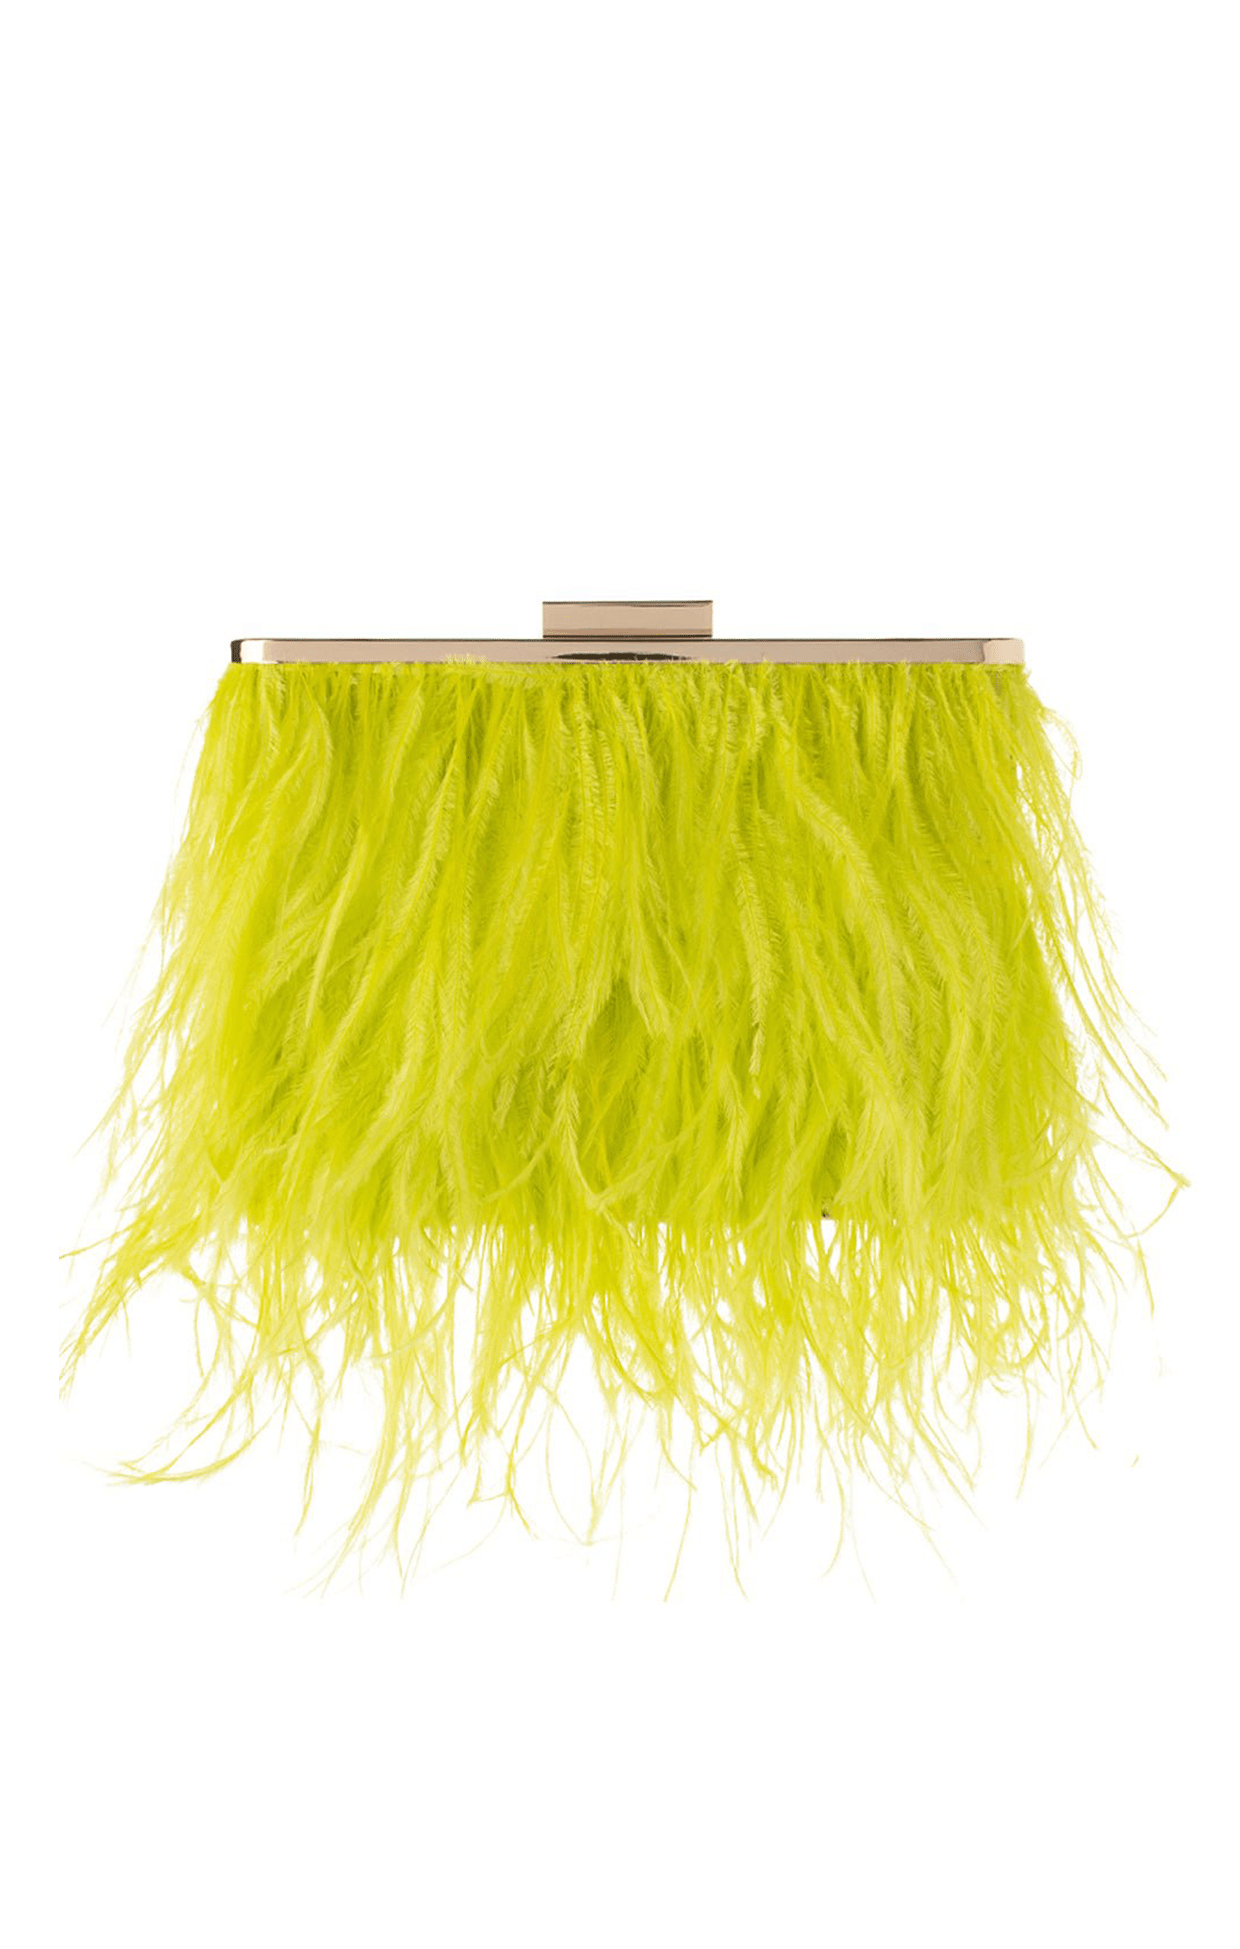 ACCESSORIES Bags Clutches One Size / Green ESTELLE FEATHER CLUTCH IN CHARTREUSE